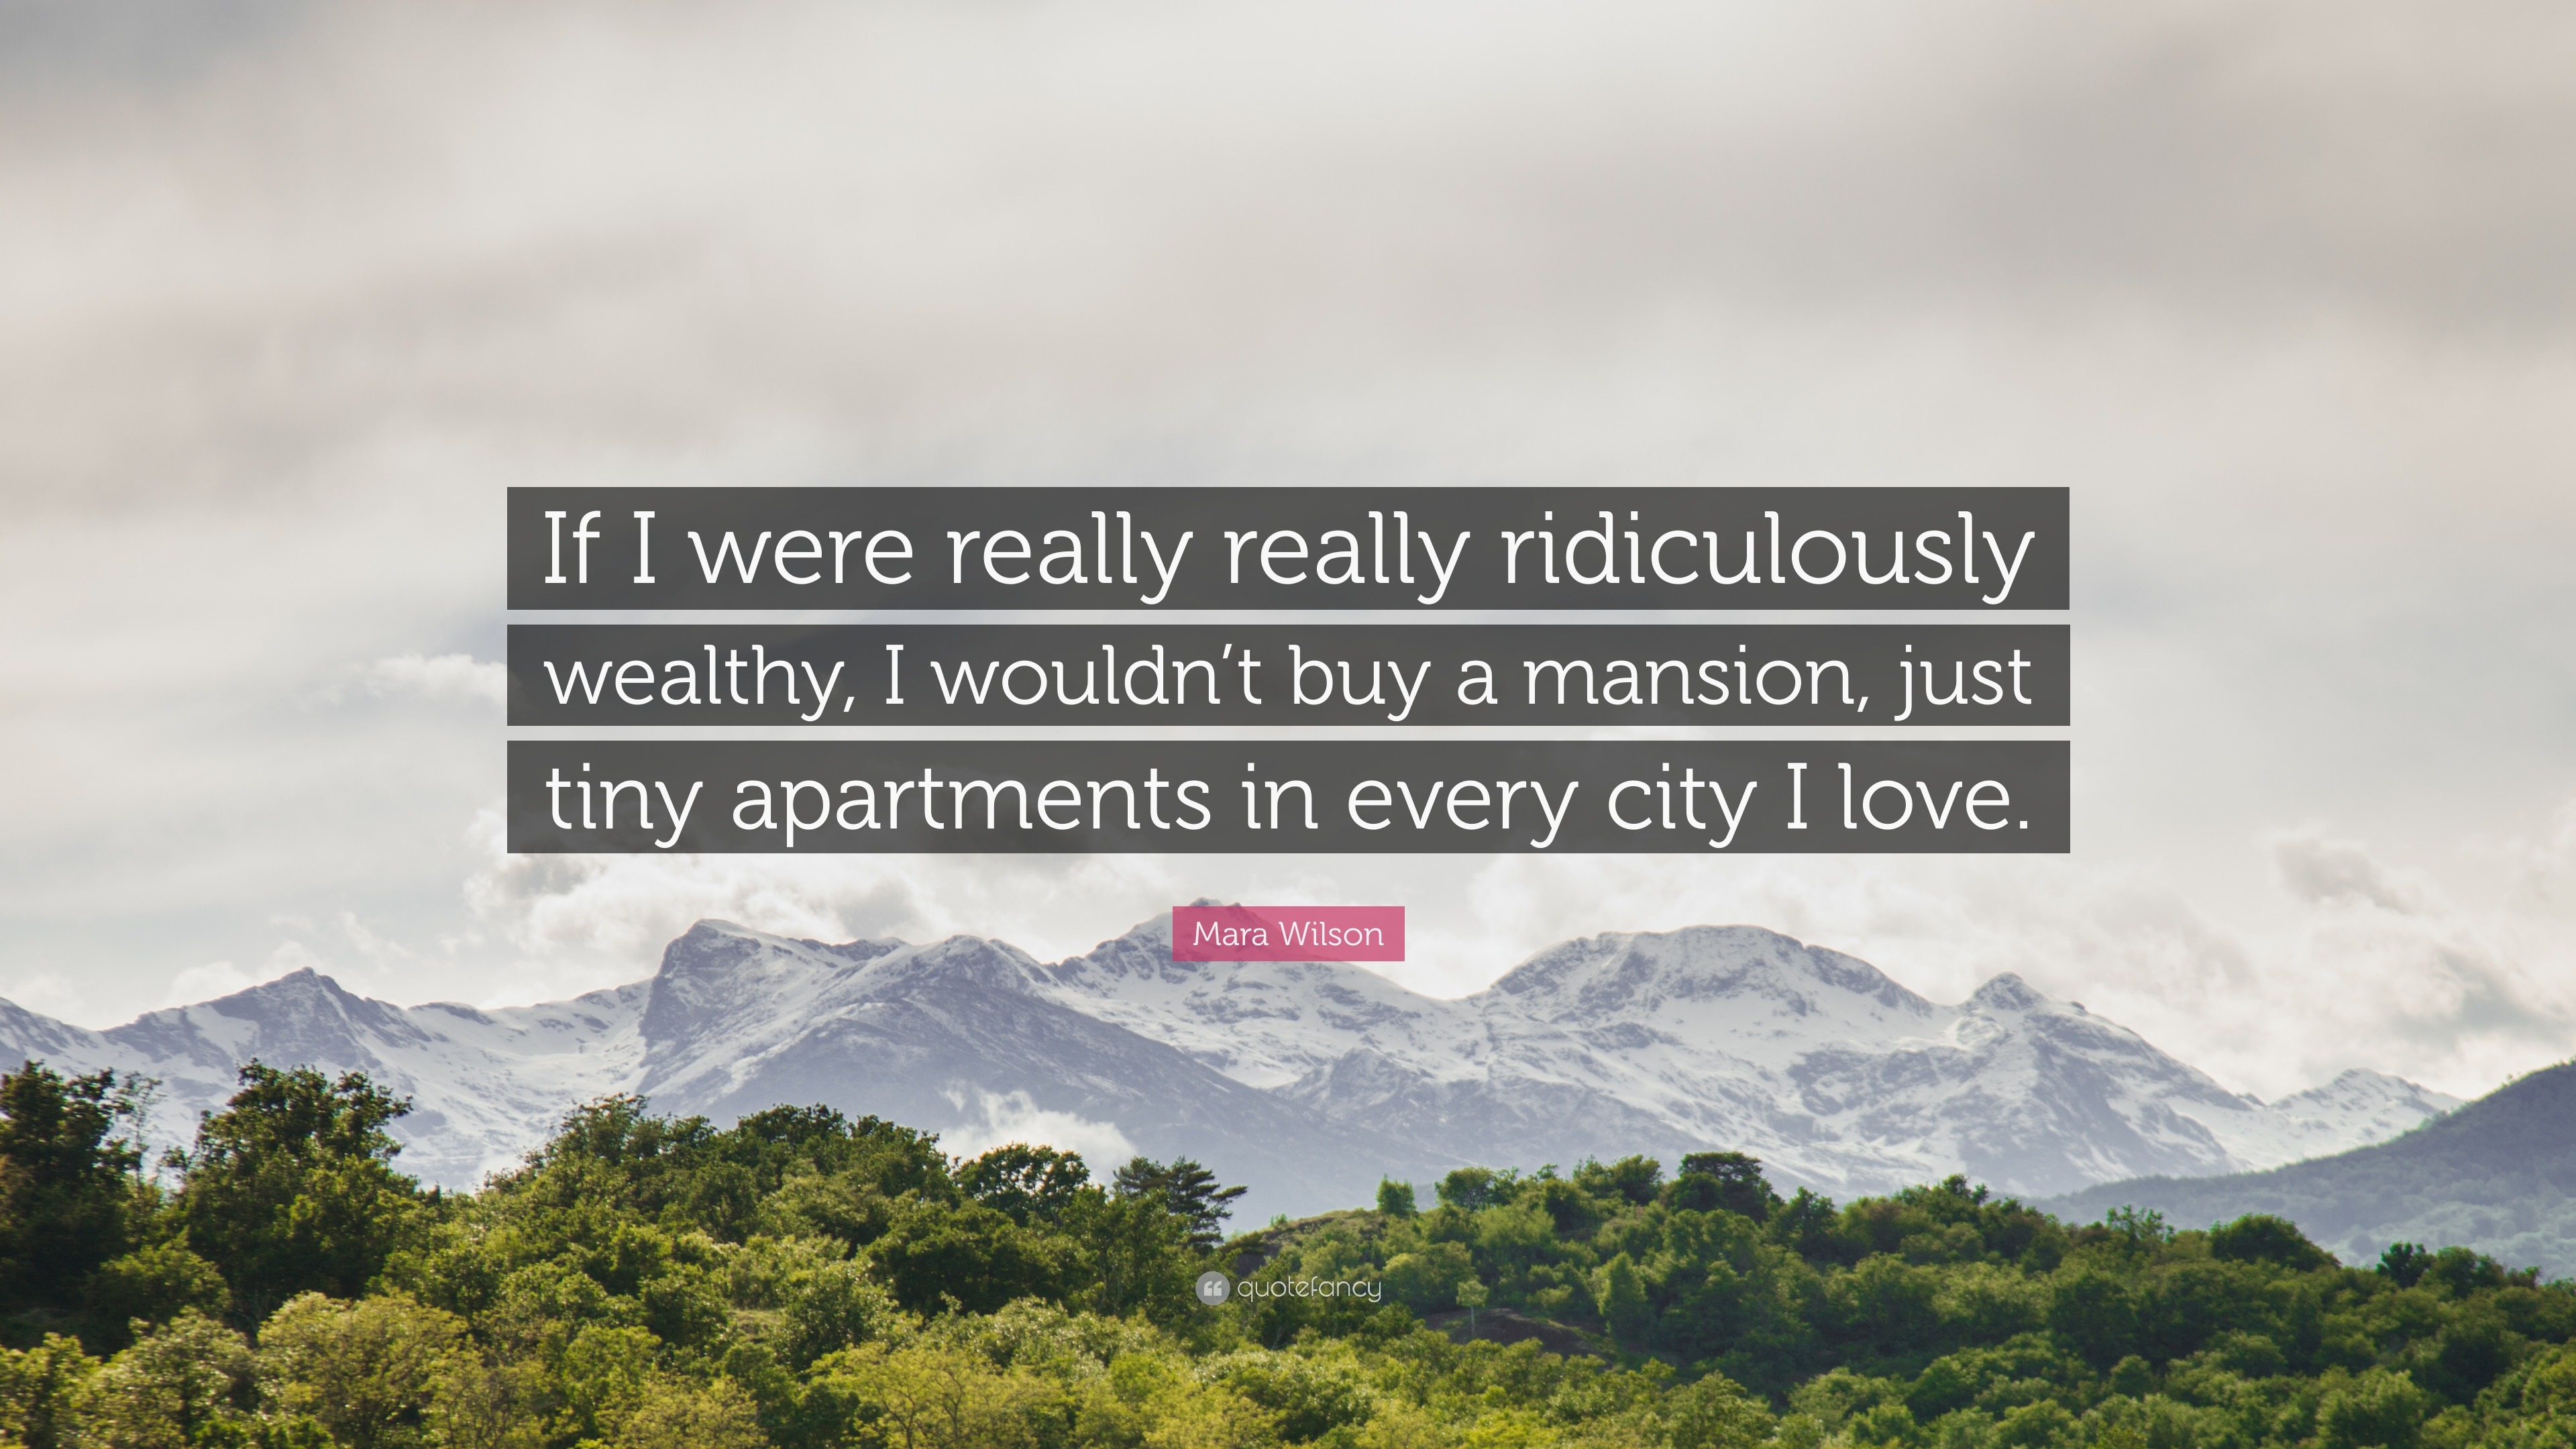 Mara Wilson Quote: “If I were really really ridiculously wealthy, I ...